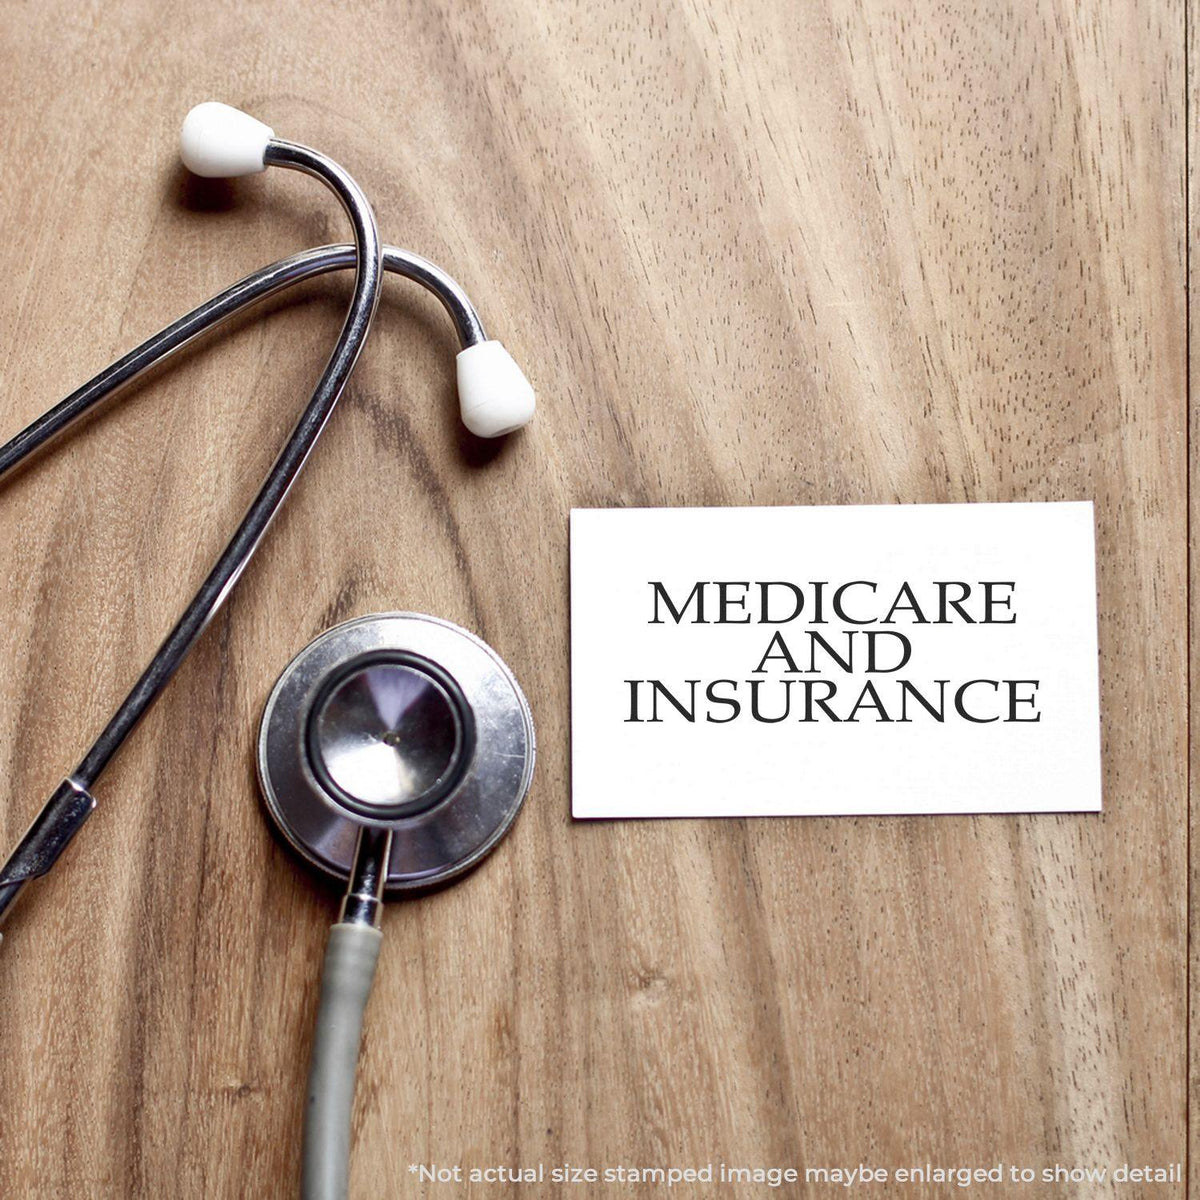 Large Medicare And Insurance Rubber Stamp In Use Photo